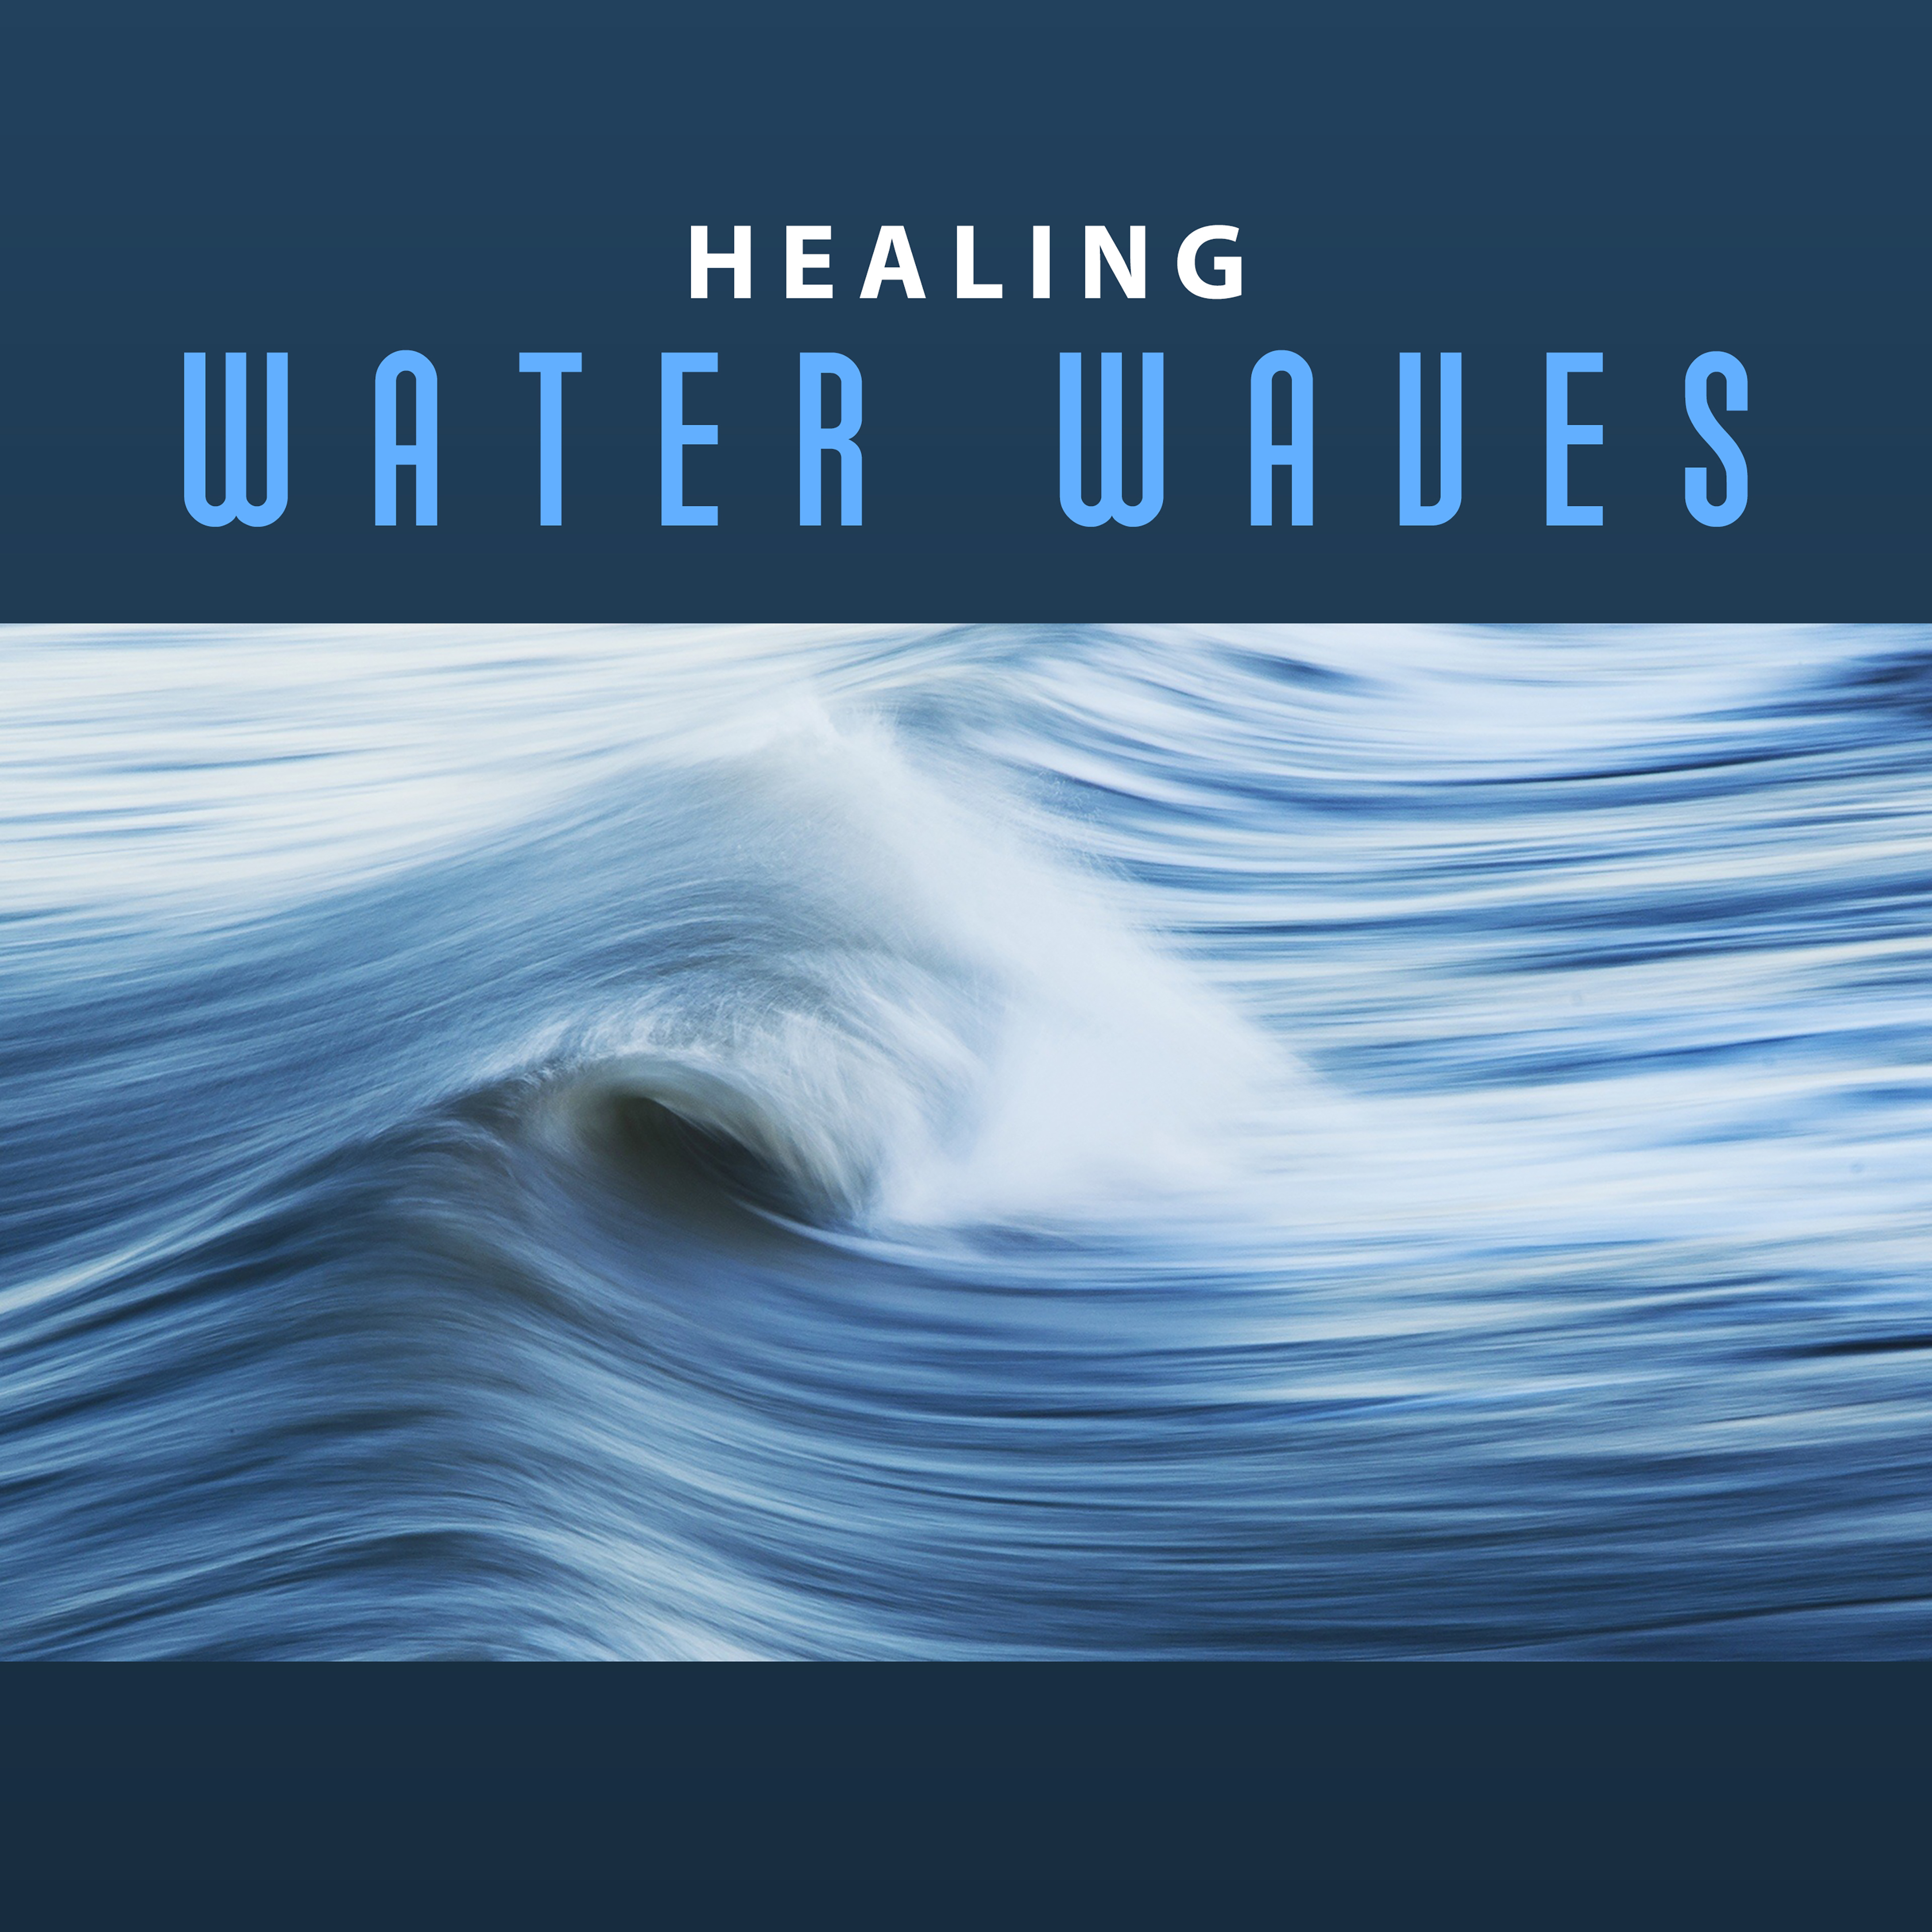 Healing Water Waves  Calming Sounds to Relax, Chilled Music, Rest a Bit, New Age Nature Sounds